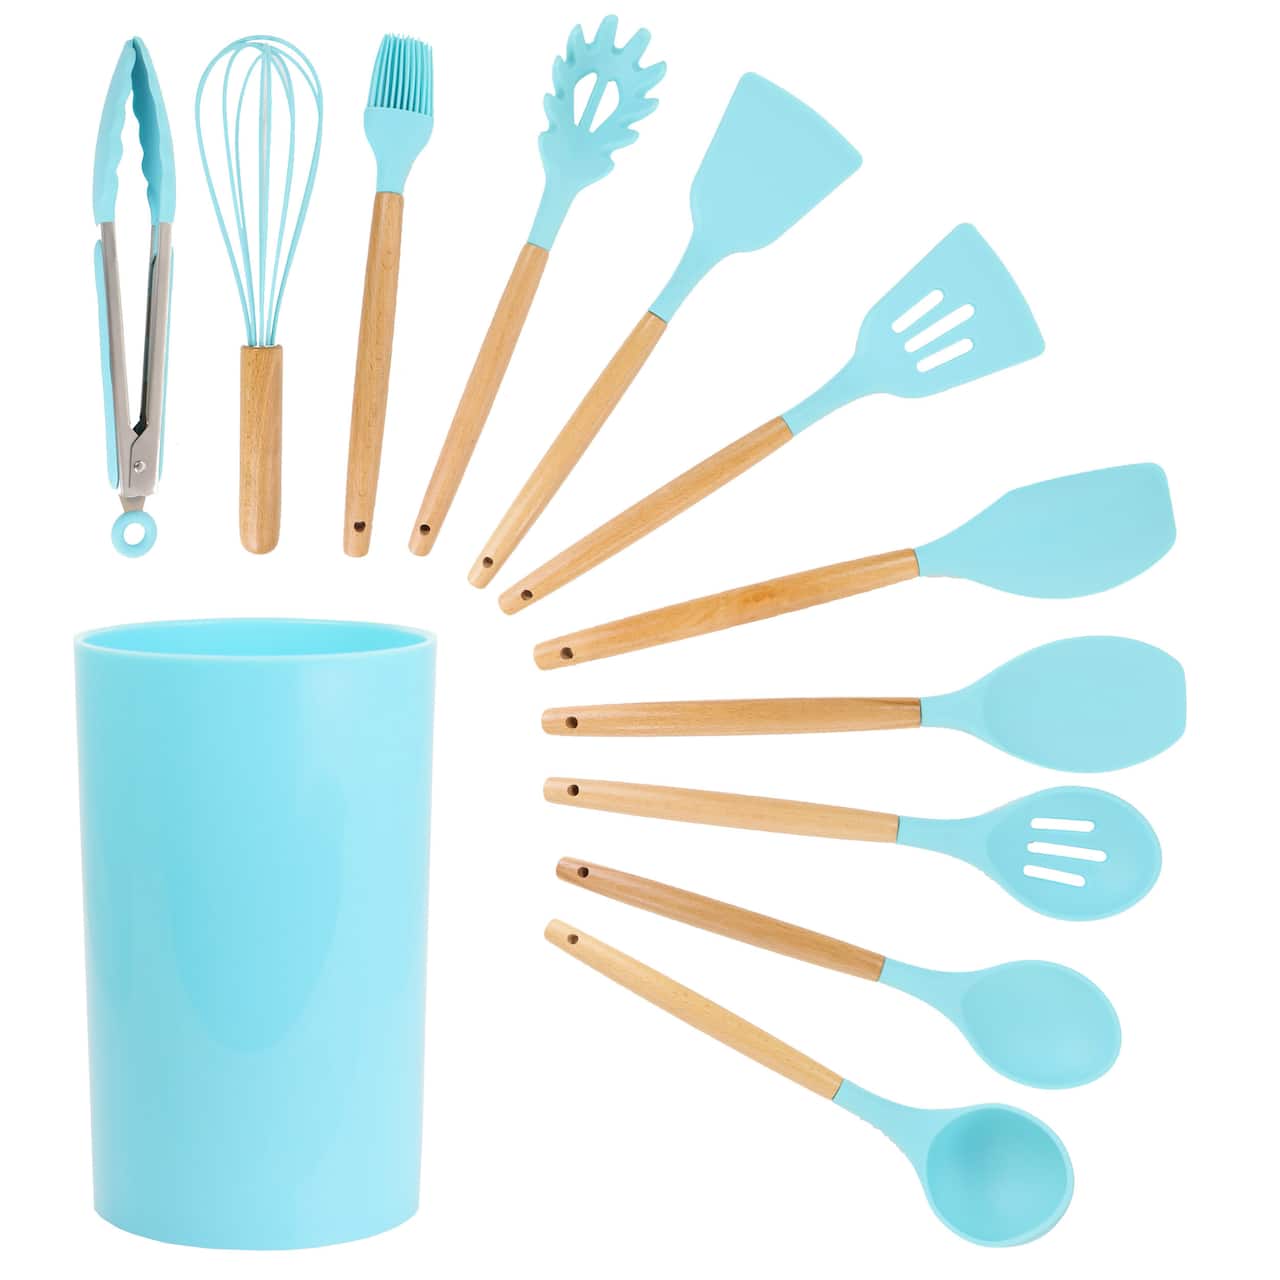 MegaChef Light Teal Silicone & Wood Cooking Utensils Set, 12ct.